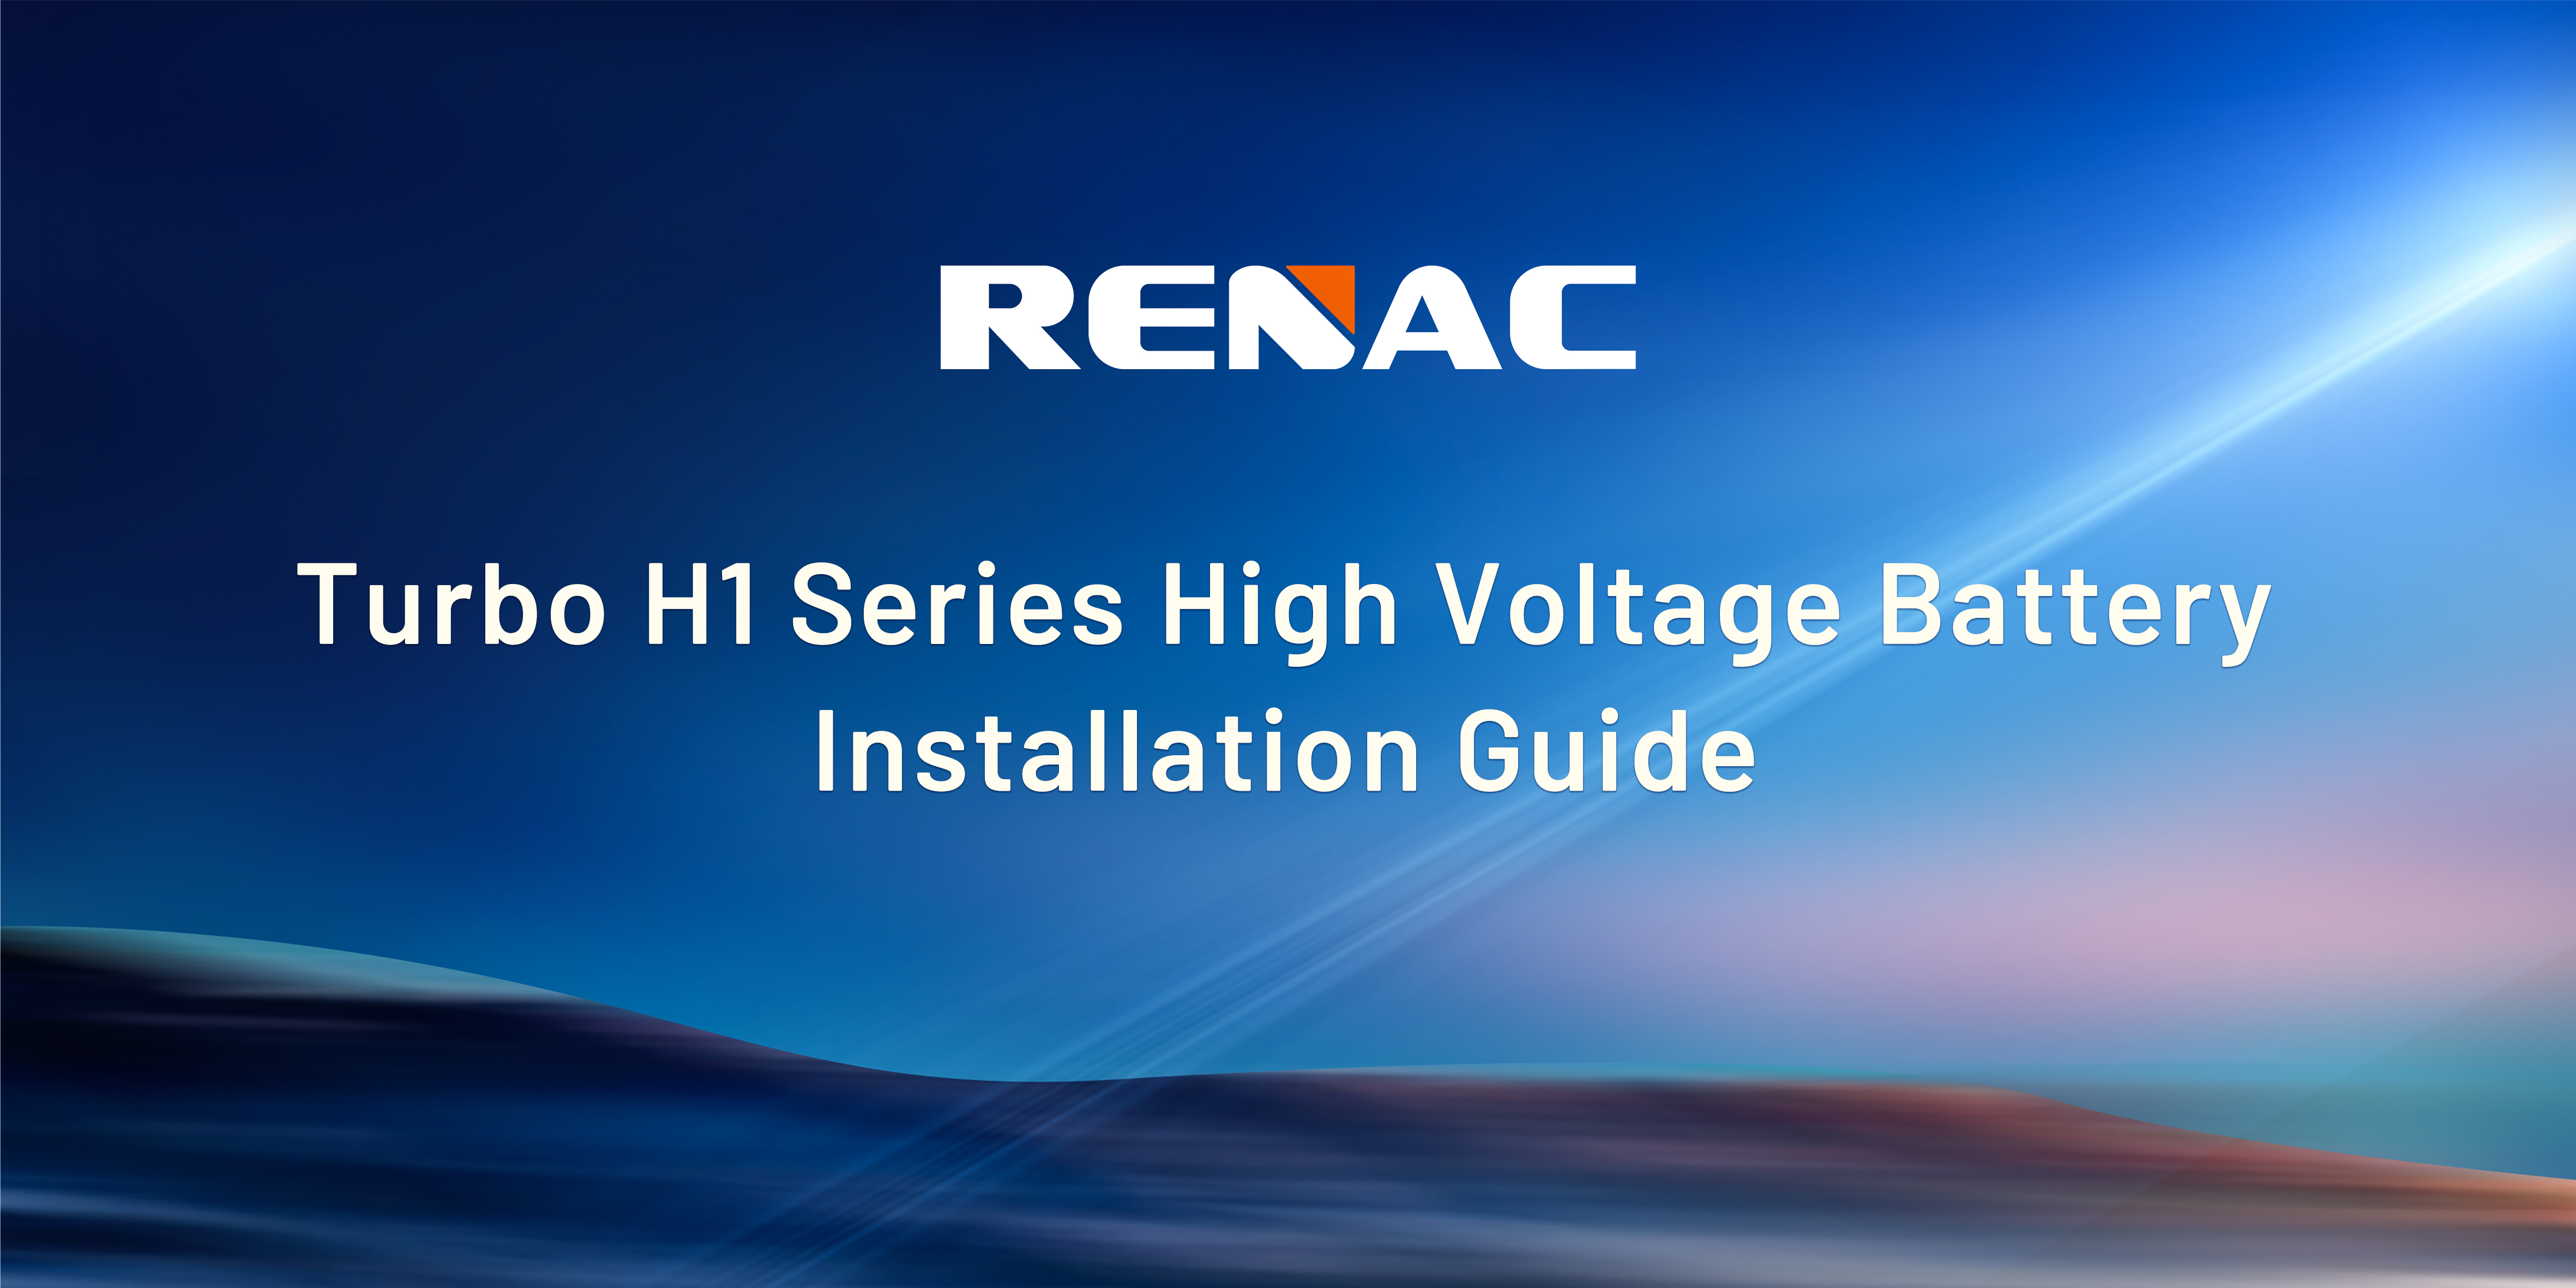 RENAC Turbo H1 Series High Voltage Battery Installation Guide